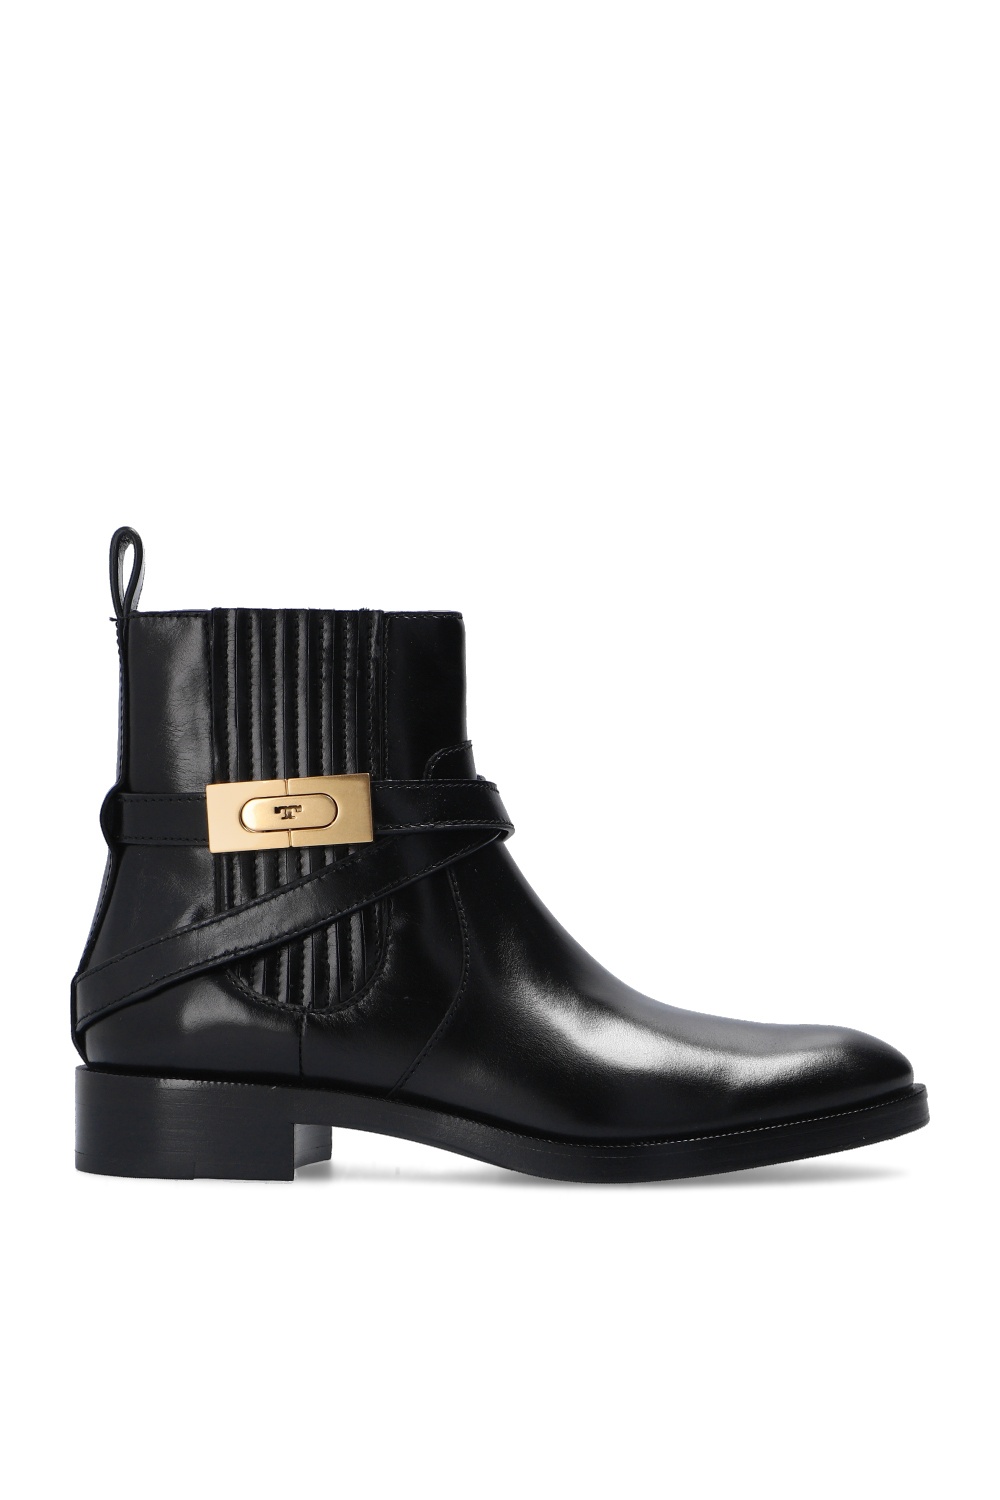 Black 'Sierra' leather ankle boots Tory Burch - Vitkac France